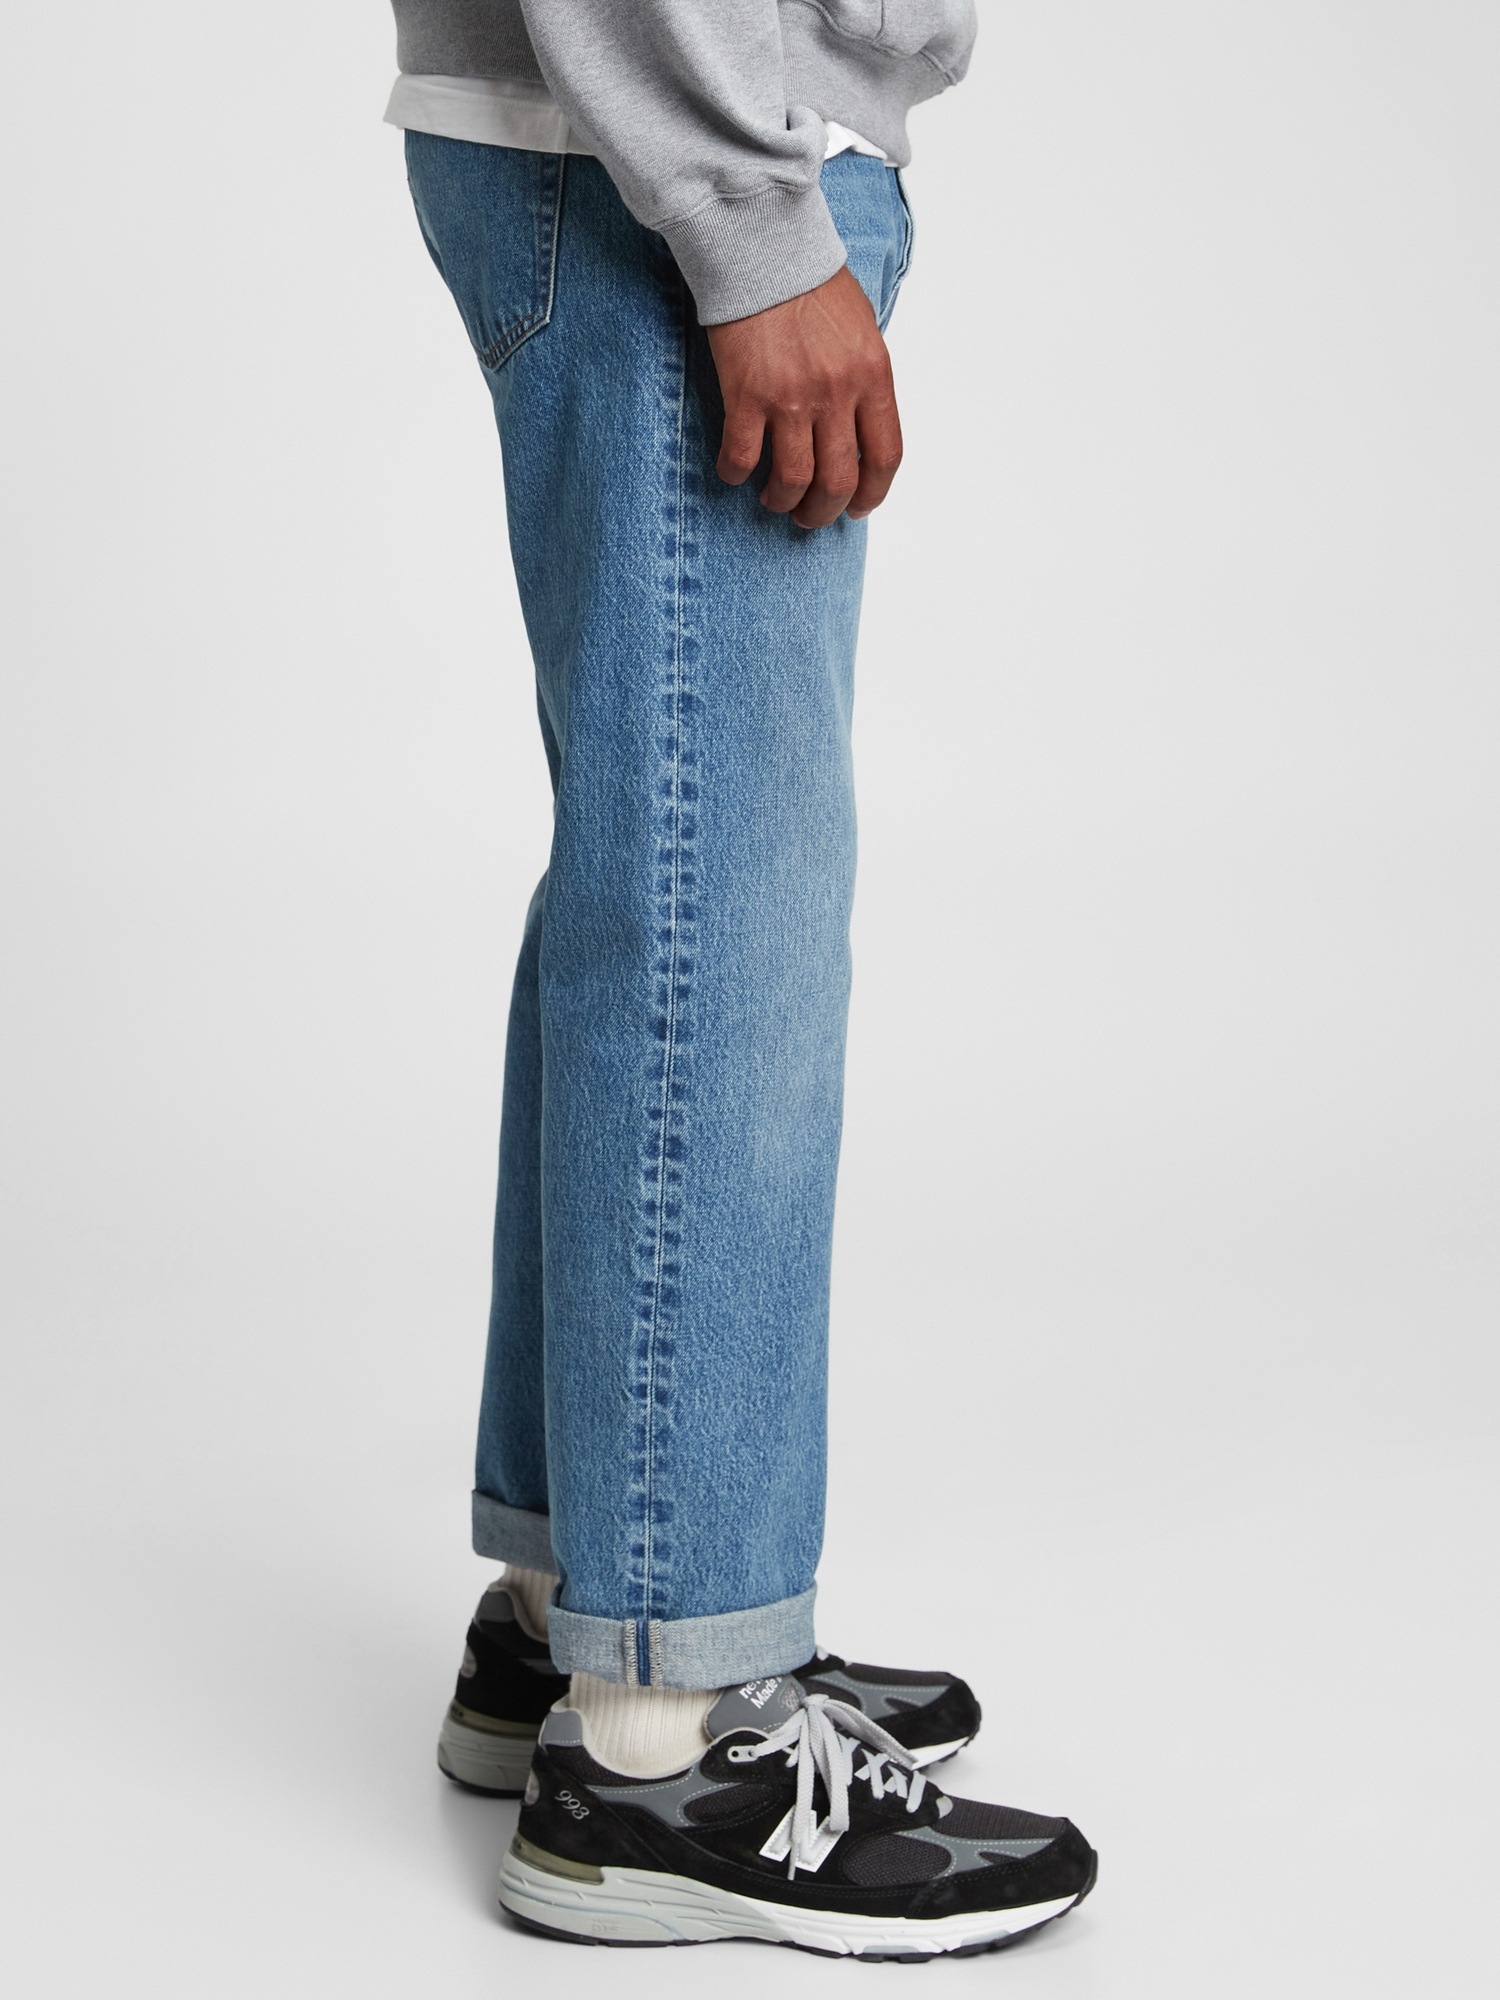 Buy Gap Original Fit Washwell Jeans (5-14yrs) from the Laura Ashley online  shop